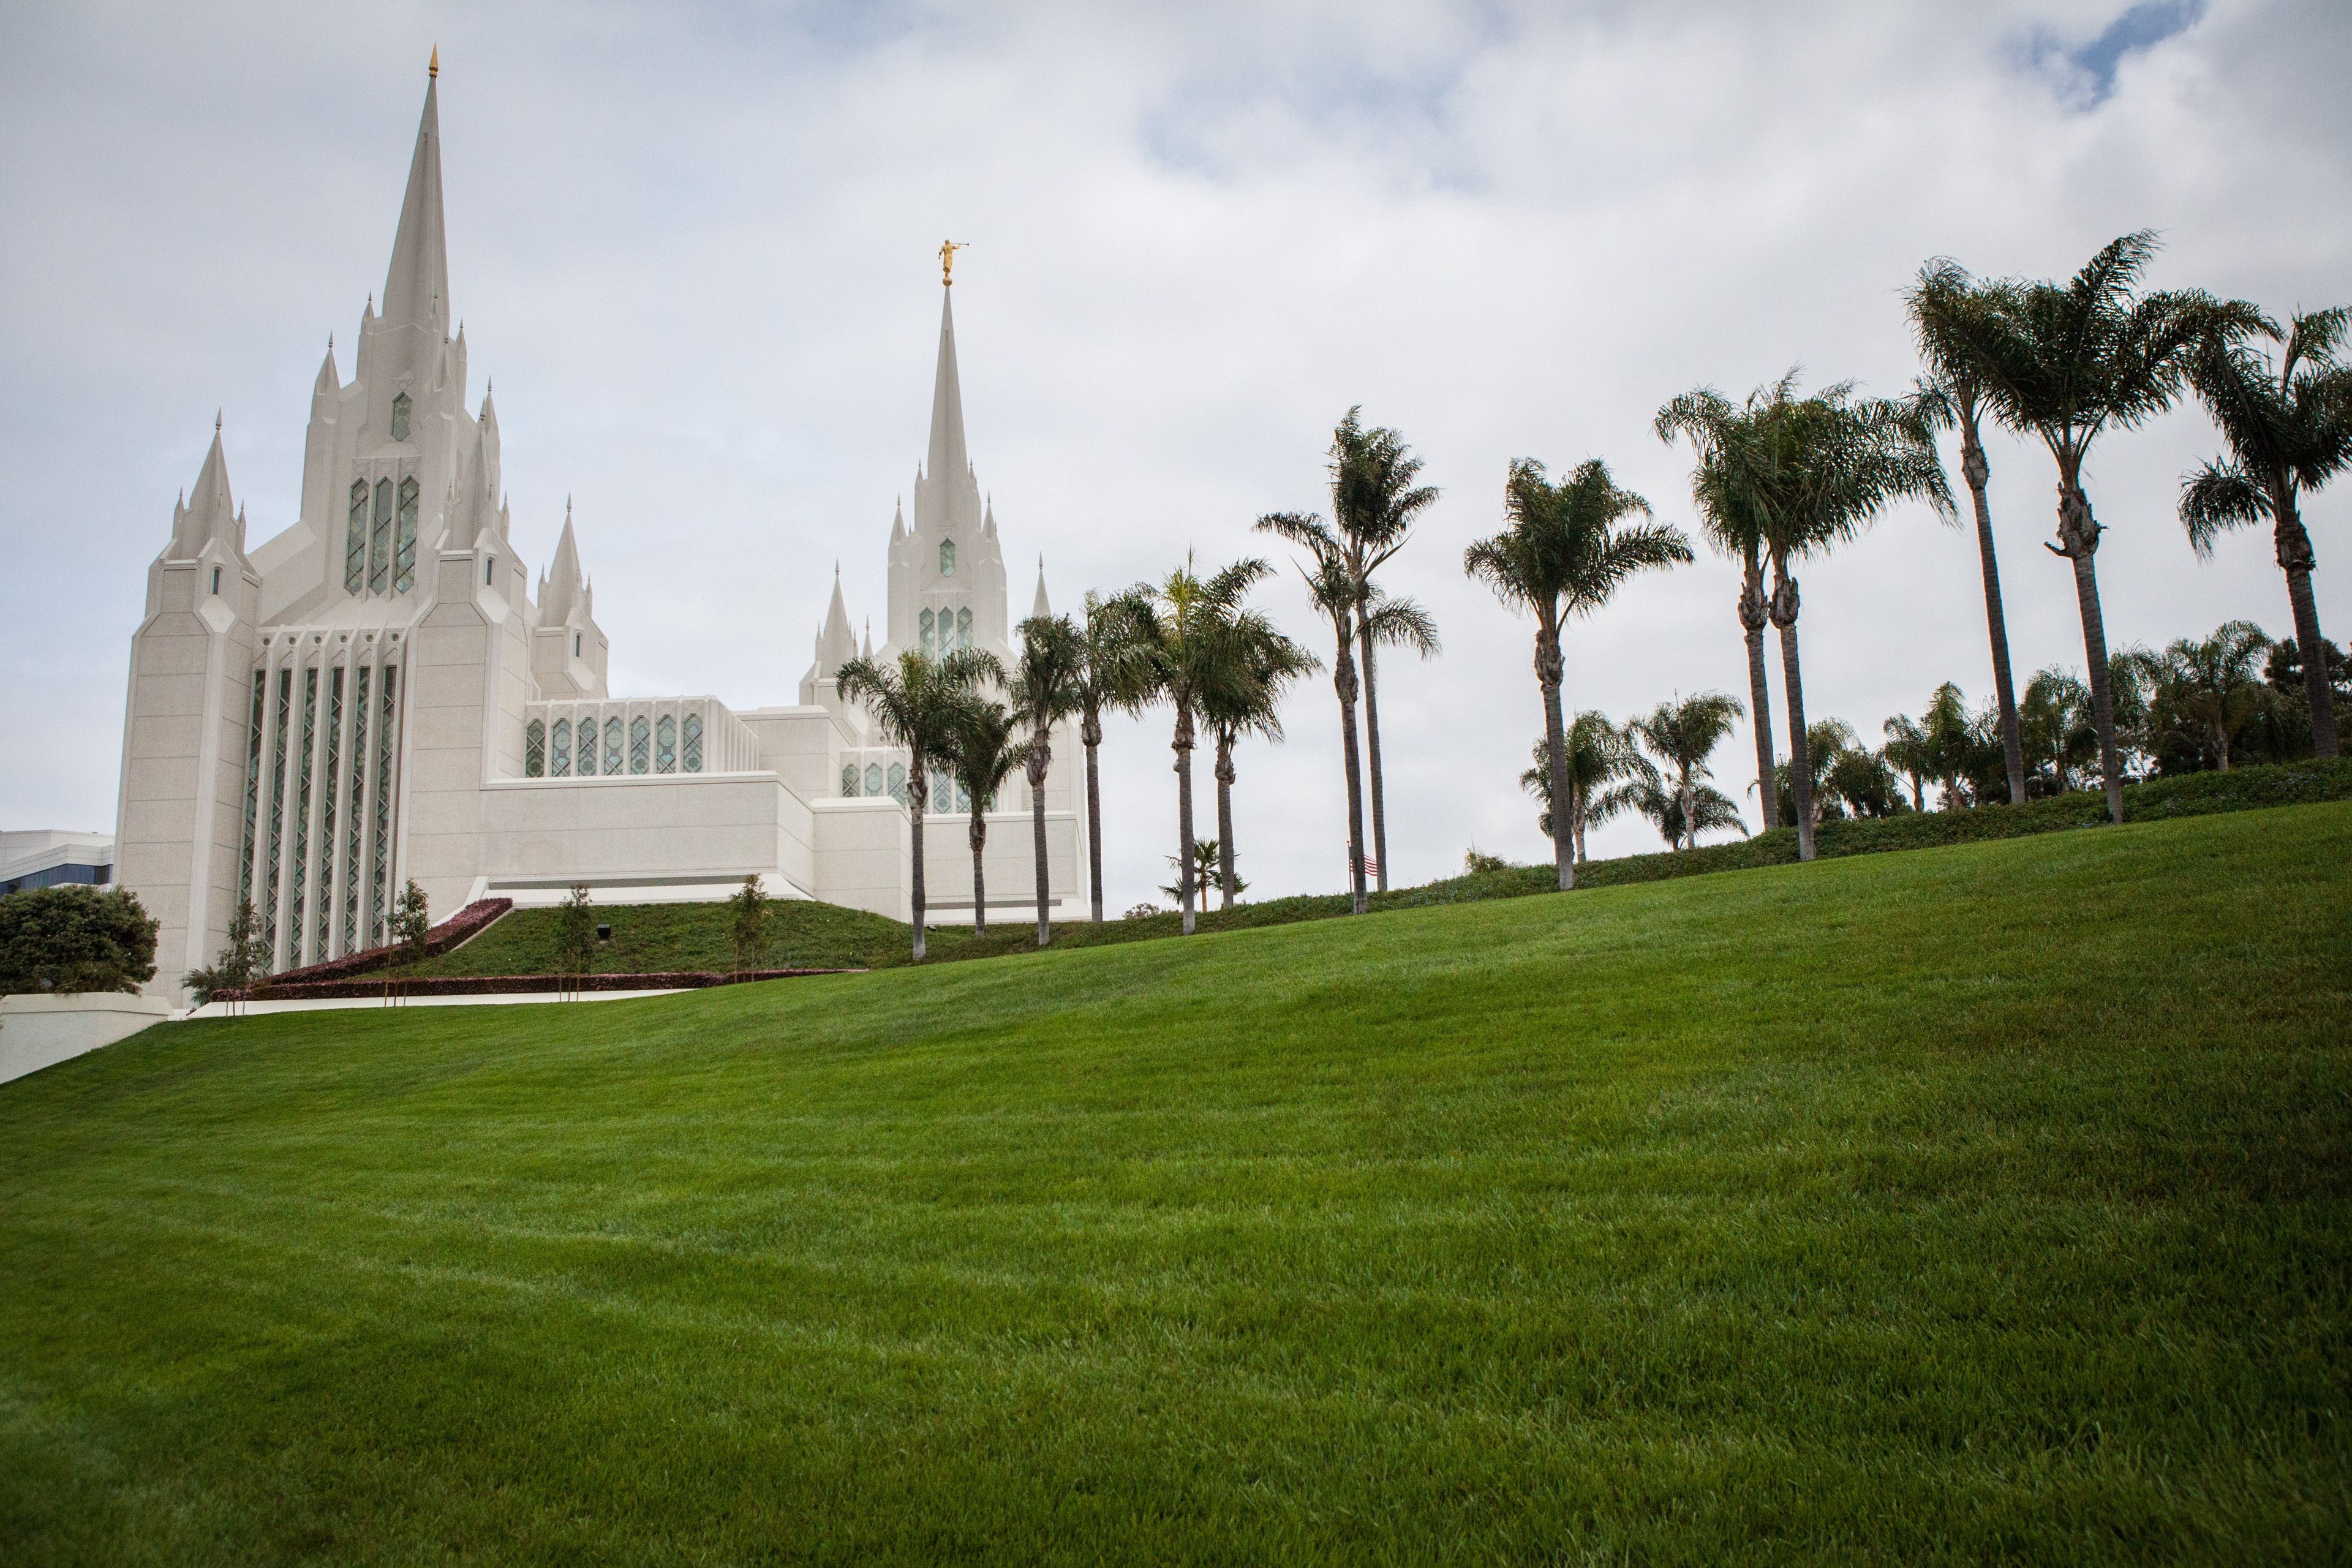 The San Diego California Temple, including scenery.